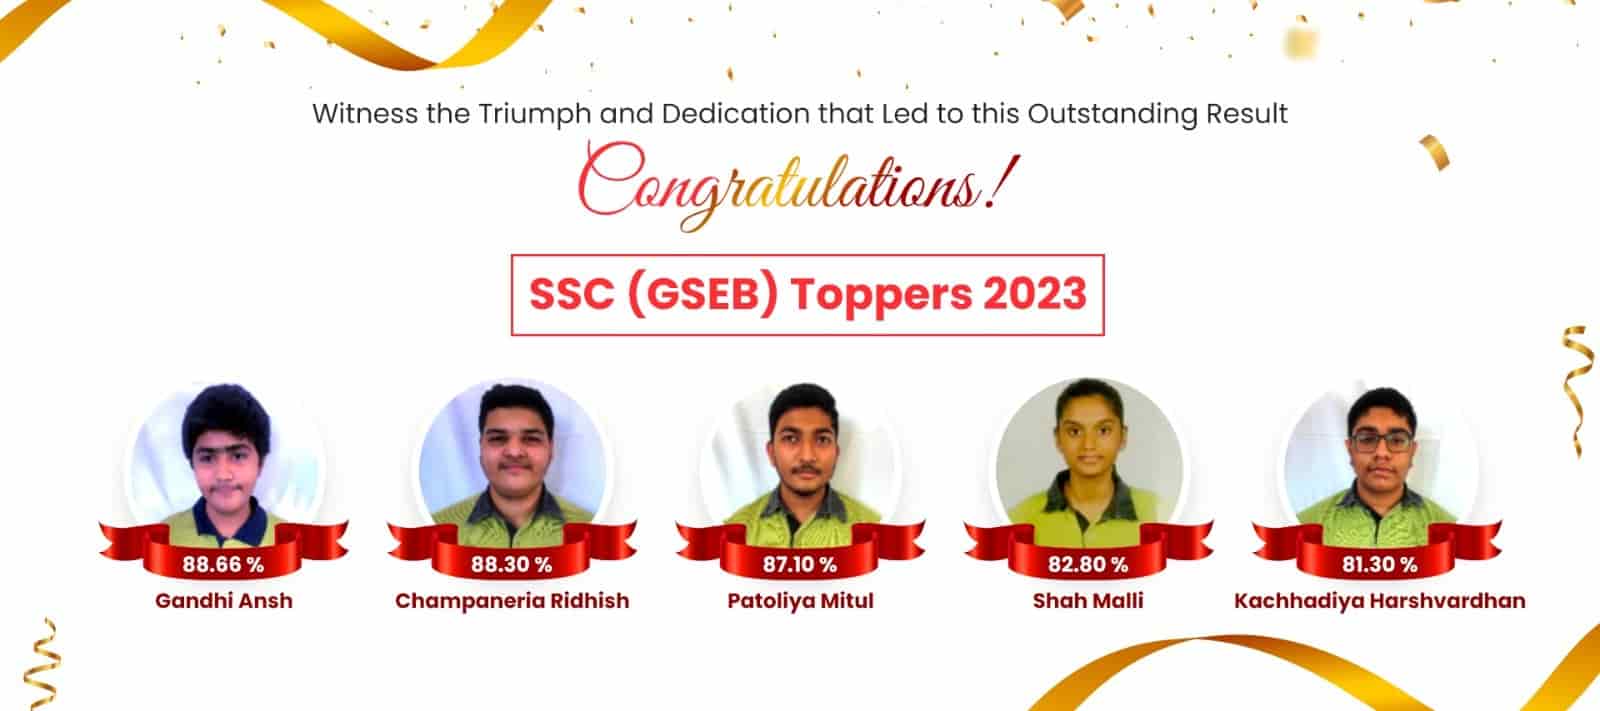 GSEB SSC Toppers